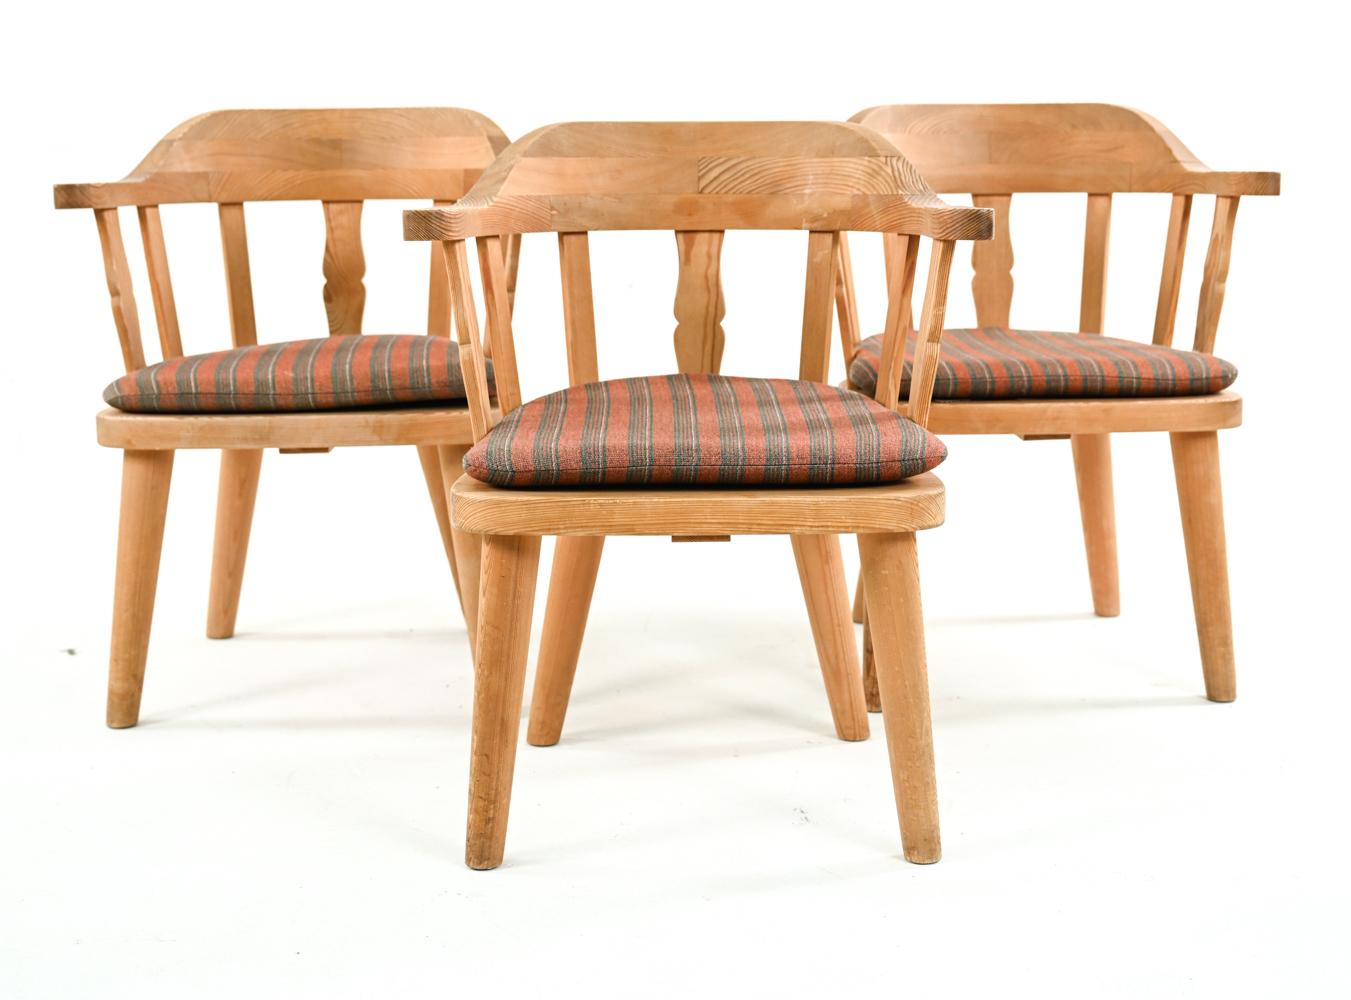 Marked underneath table and chairs: Krogenæs Møbler. A Norwegian modern set of three pine chairs with removable cushions and a petite round table, c. 1970's.